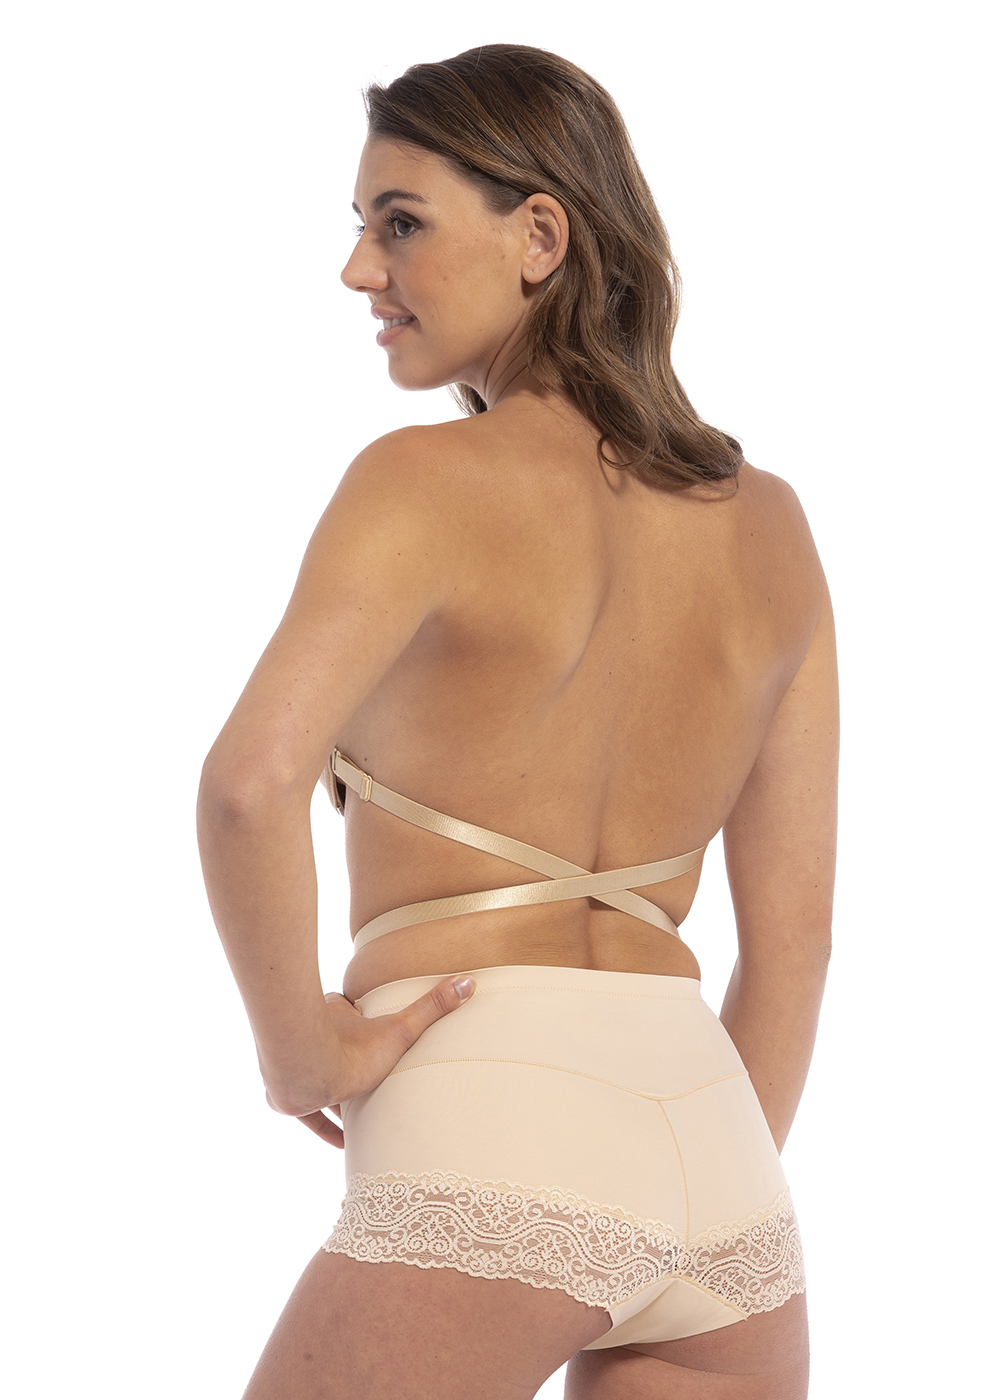 Backless Bra, Invisible Lace Wedding Bras, Low Back Push Up